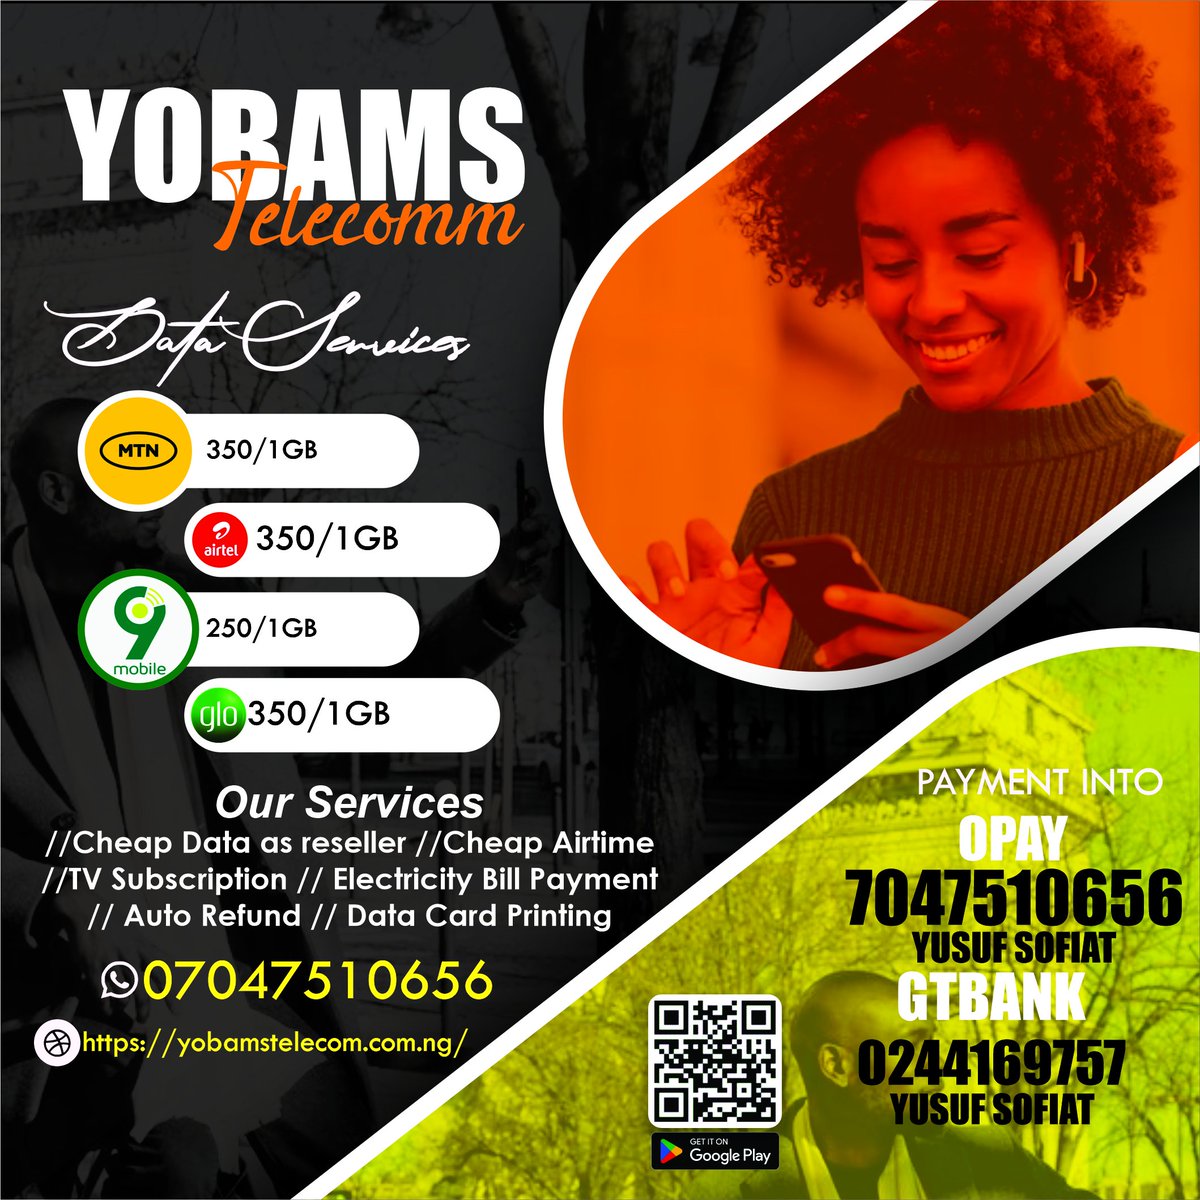 Dear viewers We would appreciate your assistance in our growing business. Would you kindly consider retweeting this tweet and registering on our website yobamstelecom.com.ng to check our exclusive offers? Your support means a lot to us. Have a wonderful day!